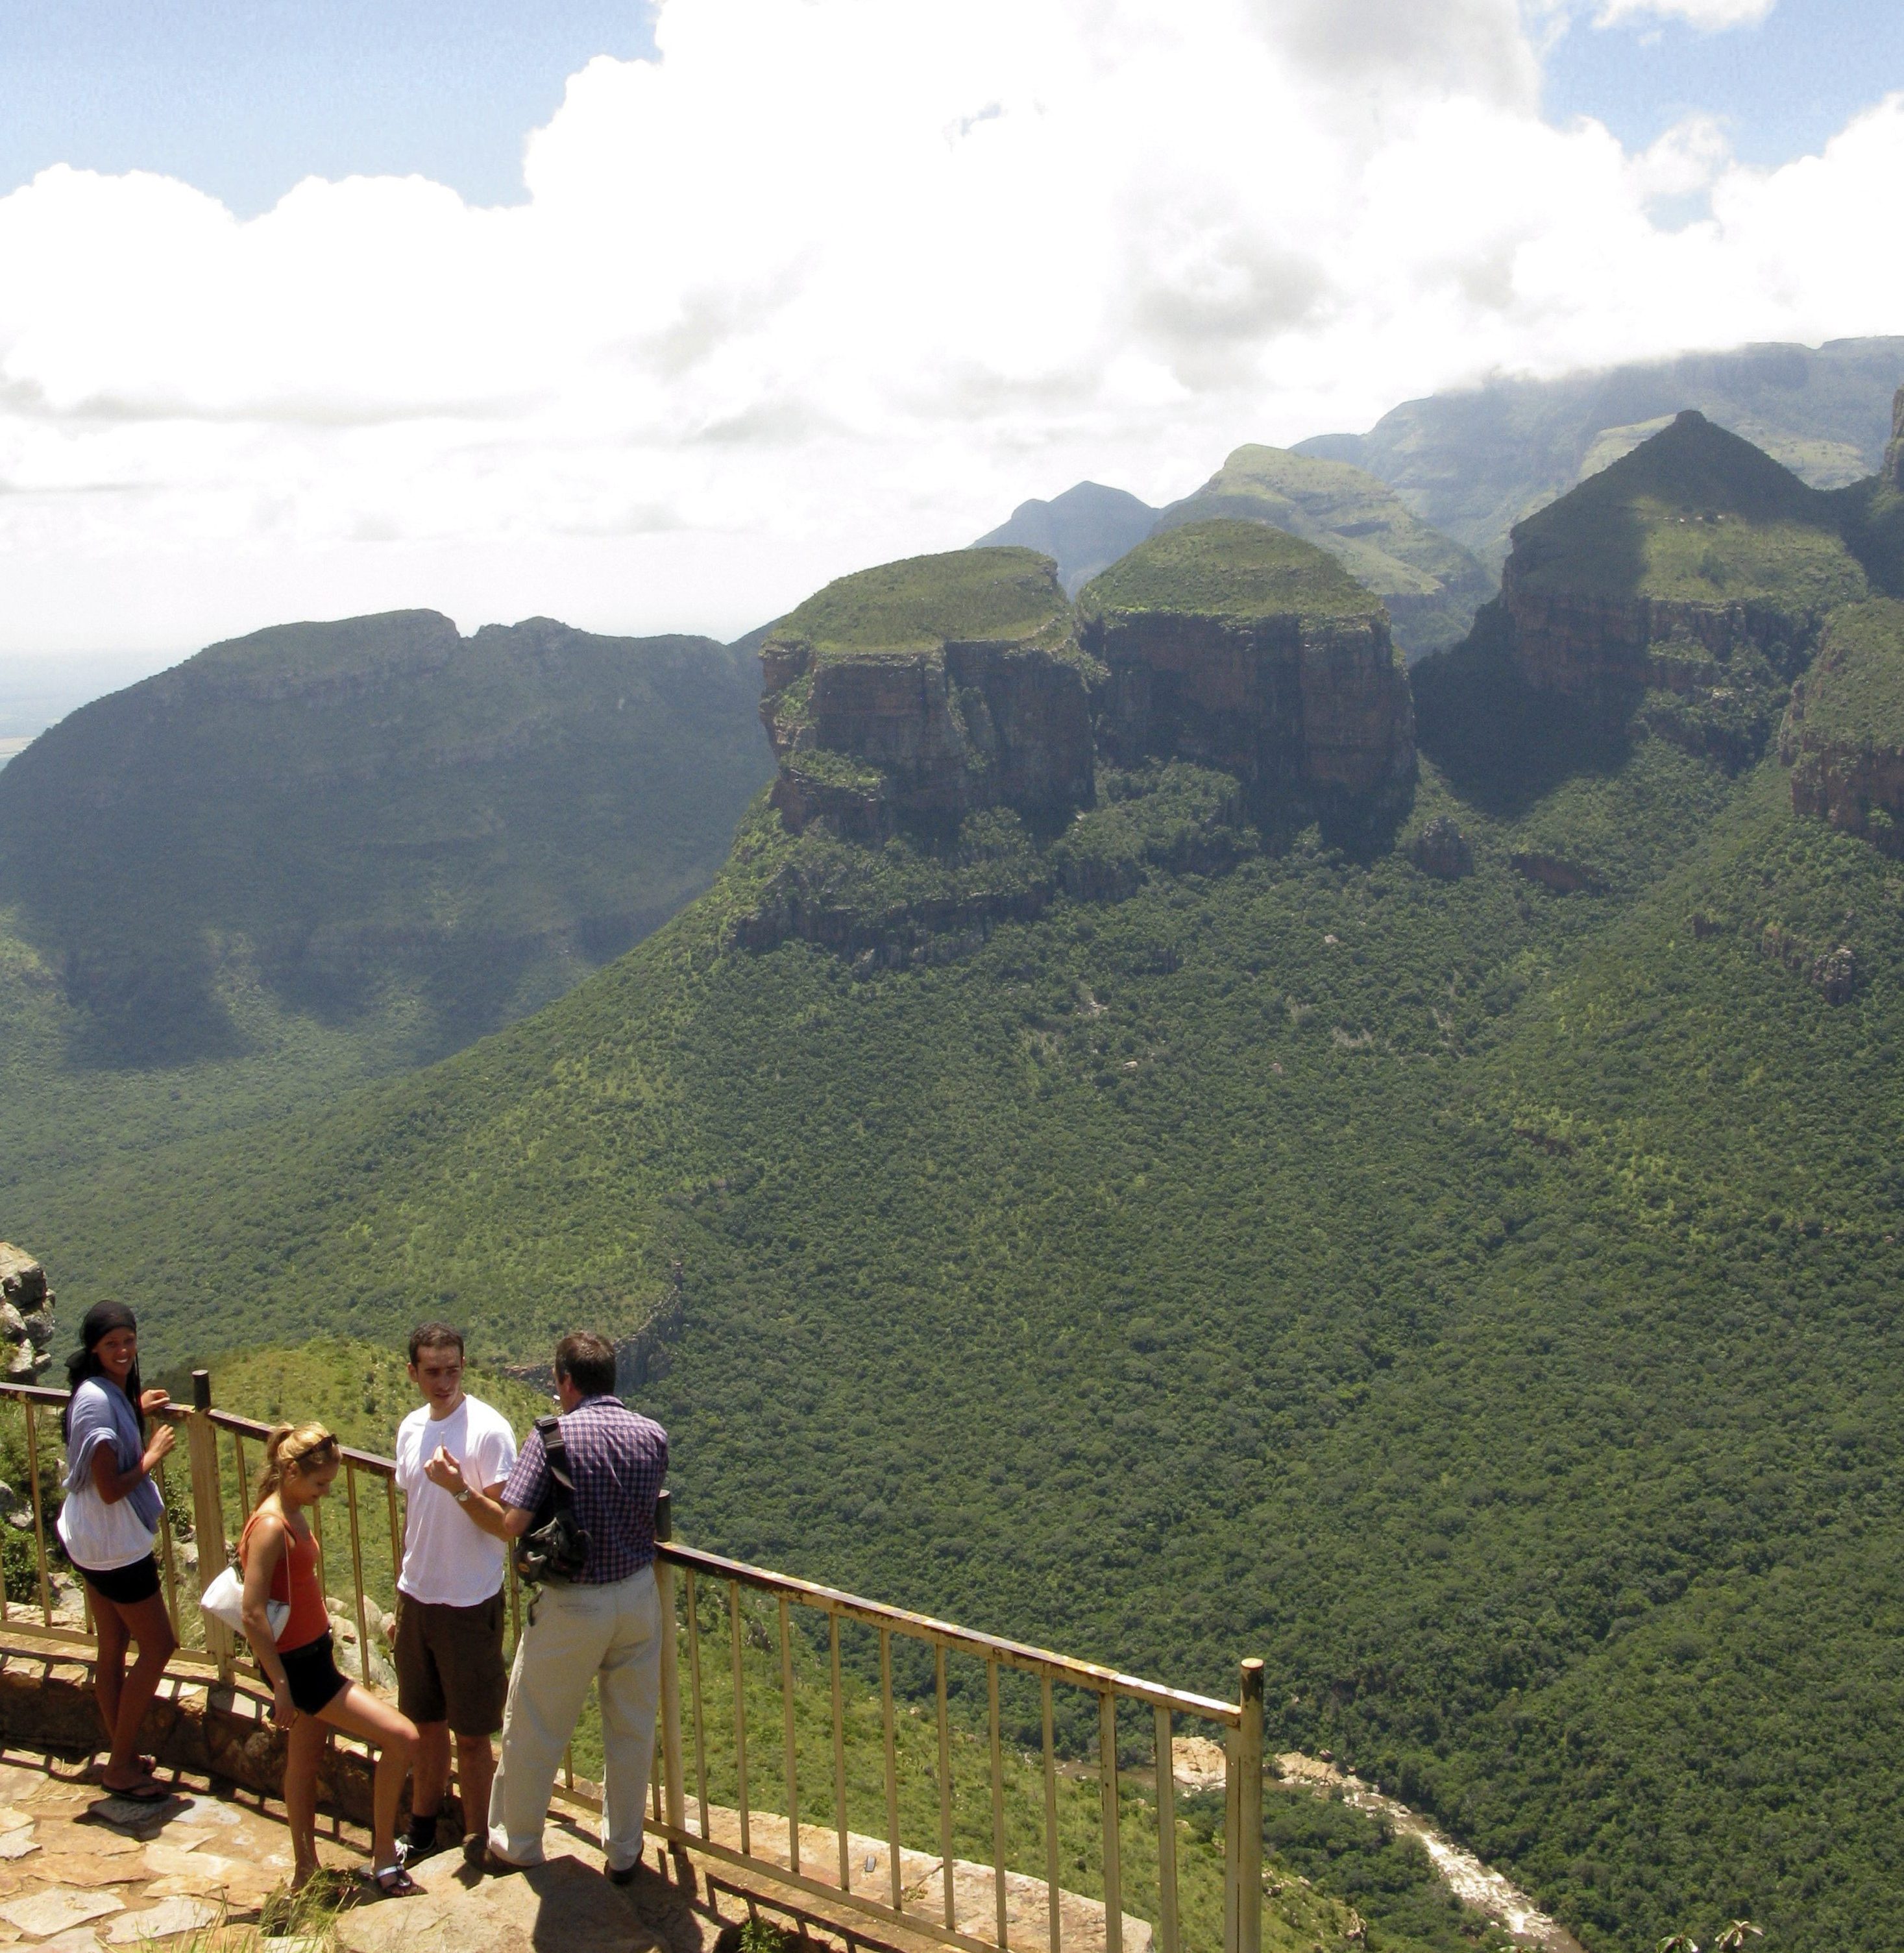 The Blyde and the Beautiful. If there were a Miss SA competition for dongas, the Blyde River Canyon would win it every year. The Three Rondavels with Mariepskop behind a group of tourist.